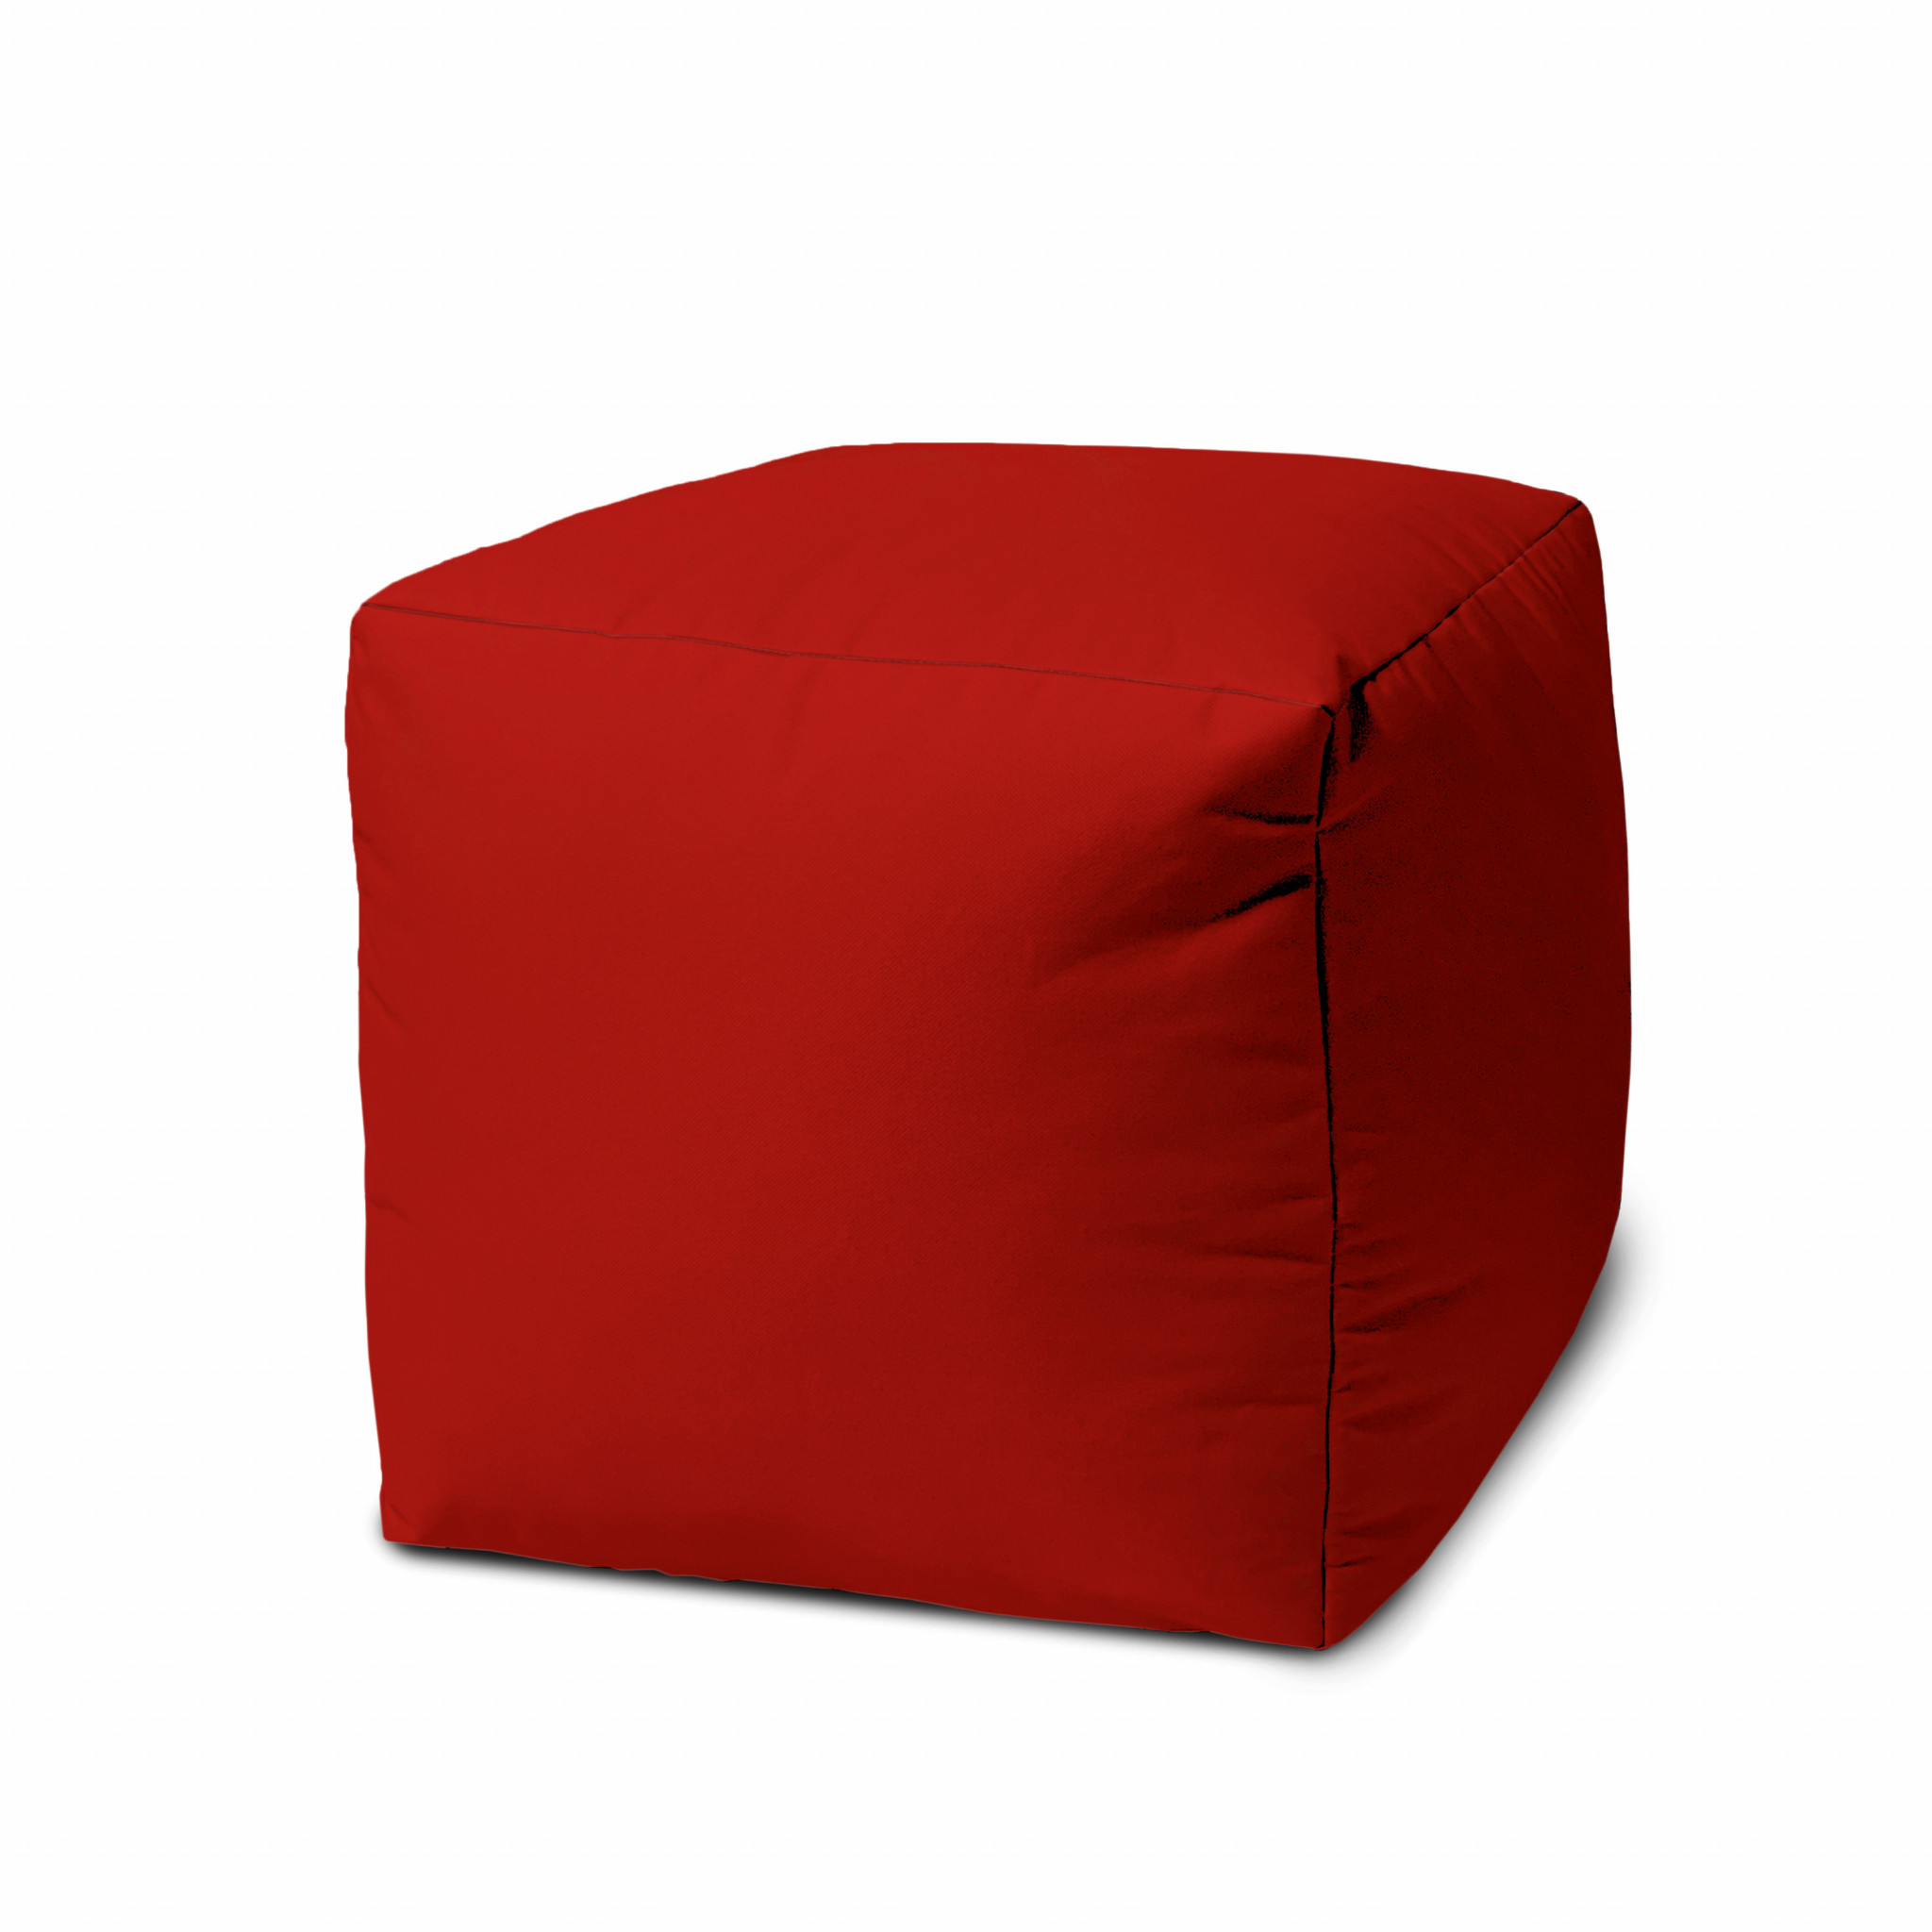 17" Cool Primary Red Solid Color Indoor Outdoor Pouf Ottoman-474172-1